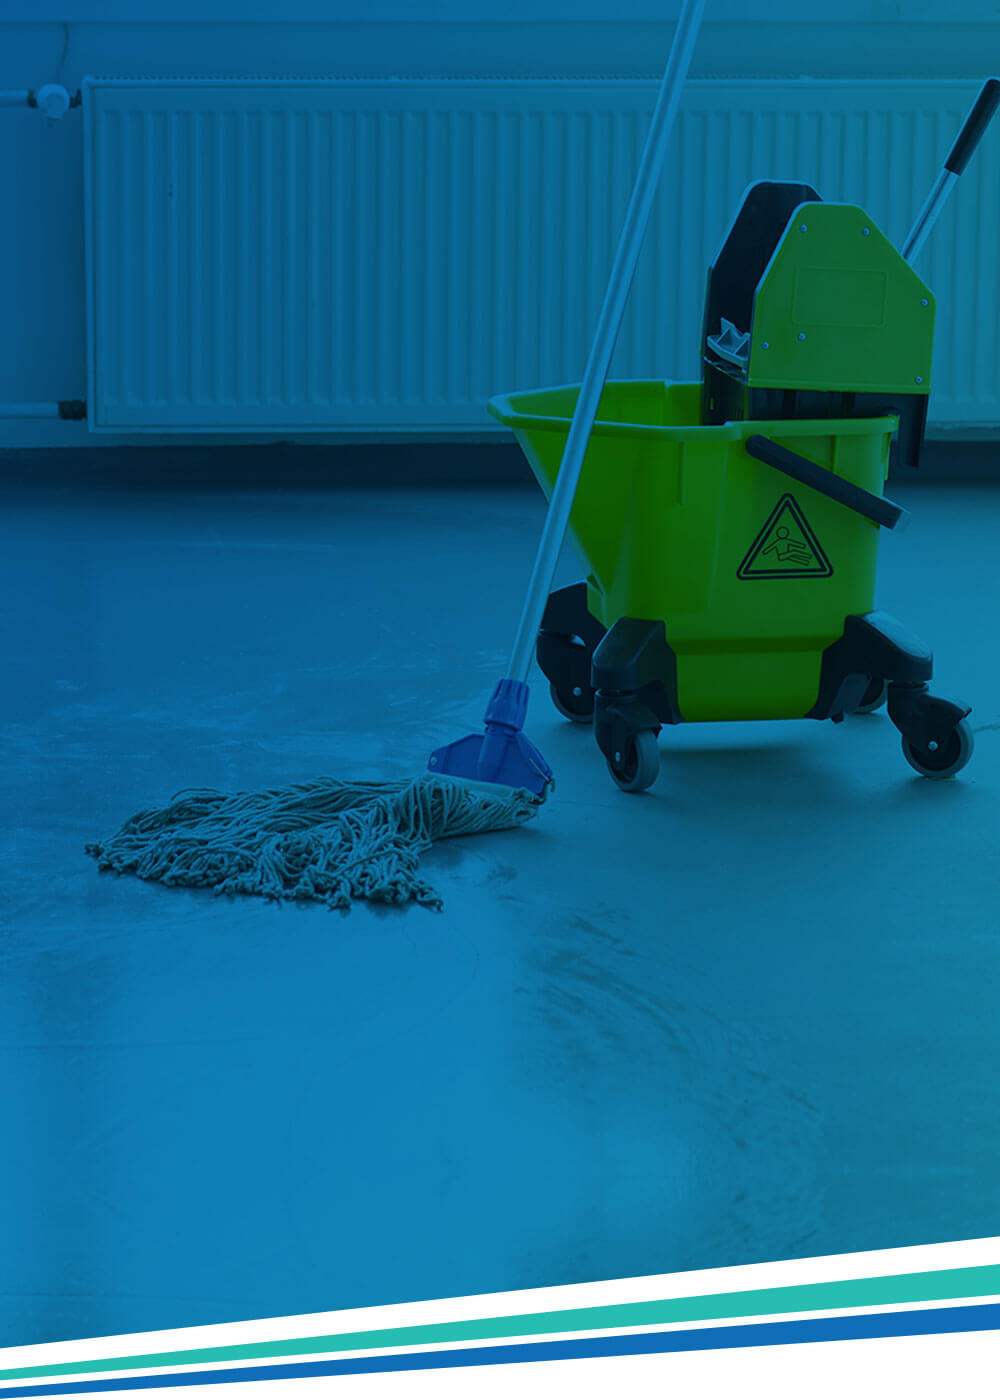 Powerit Cleaning Chemicals tailored for Professional Housekeeping - for mobile